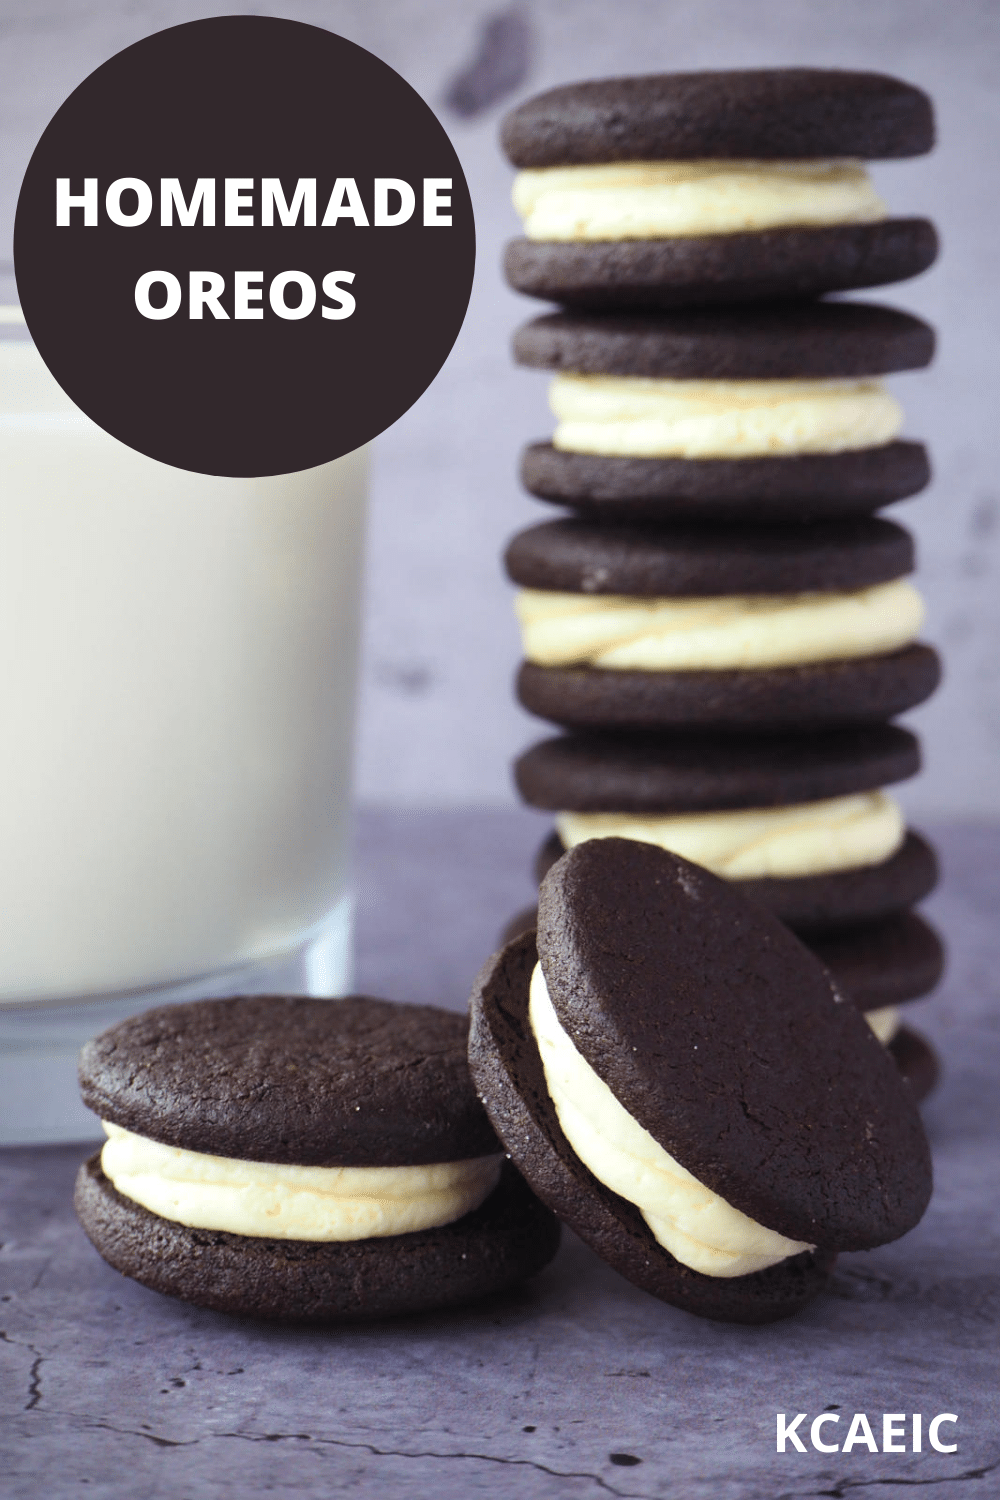 side view of stack of homemade oreos, with single oreo and one oreo propped on its side, with glass of milk and text overlay, homemade oreos and KCAEIC.